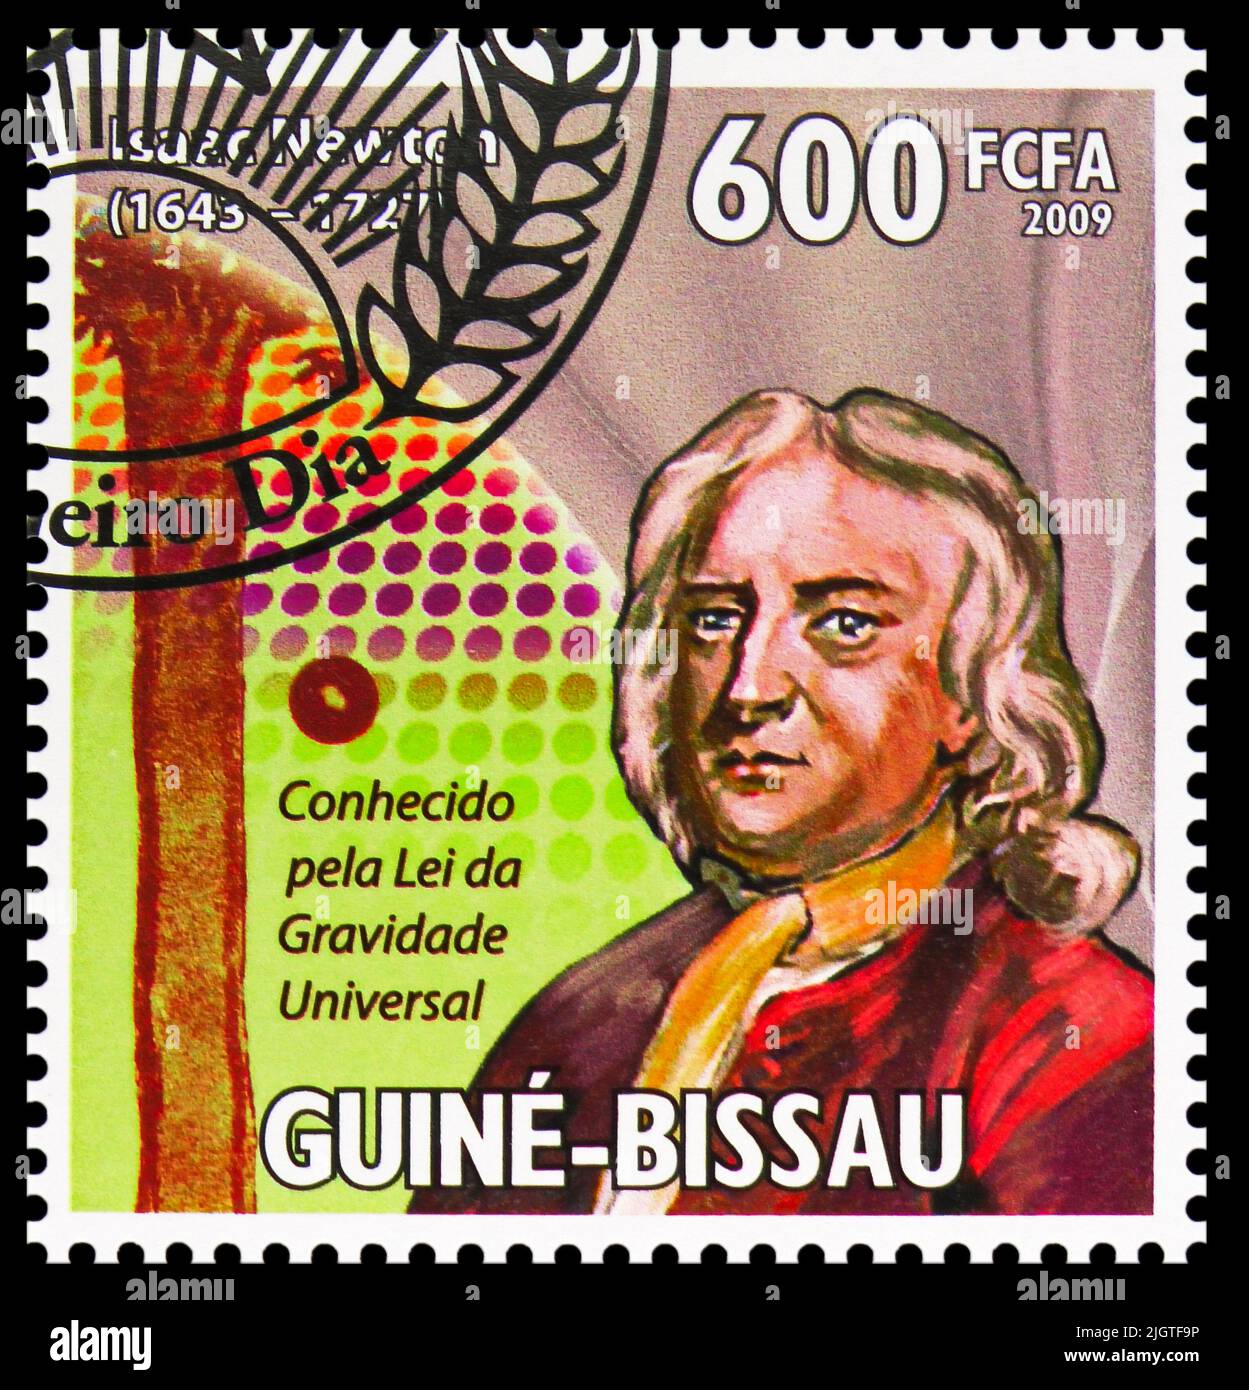 MOSCOW, RUSSIA - JUNE 17, 2022: Postage stamp printed in Guinea-Bissau shows Isaac Newton, Famous physicists serie, circa 2009 Stock Photo